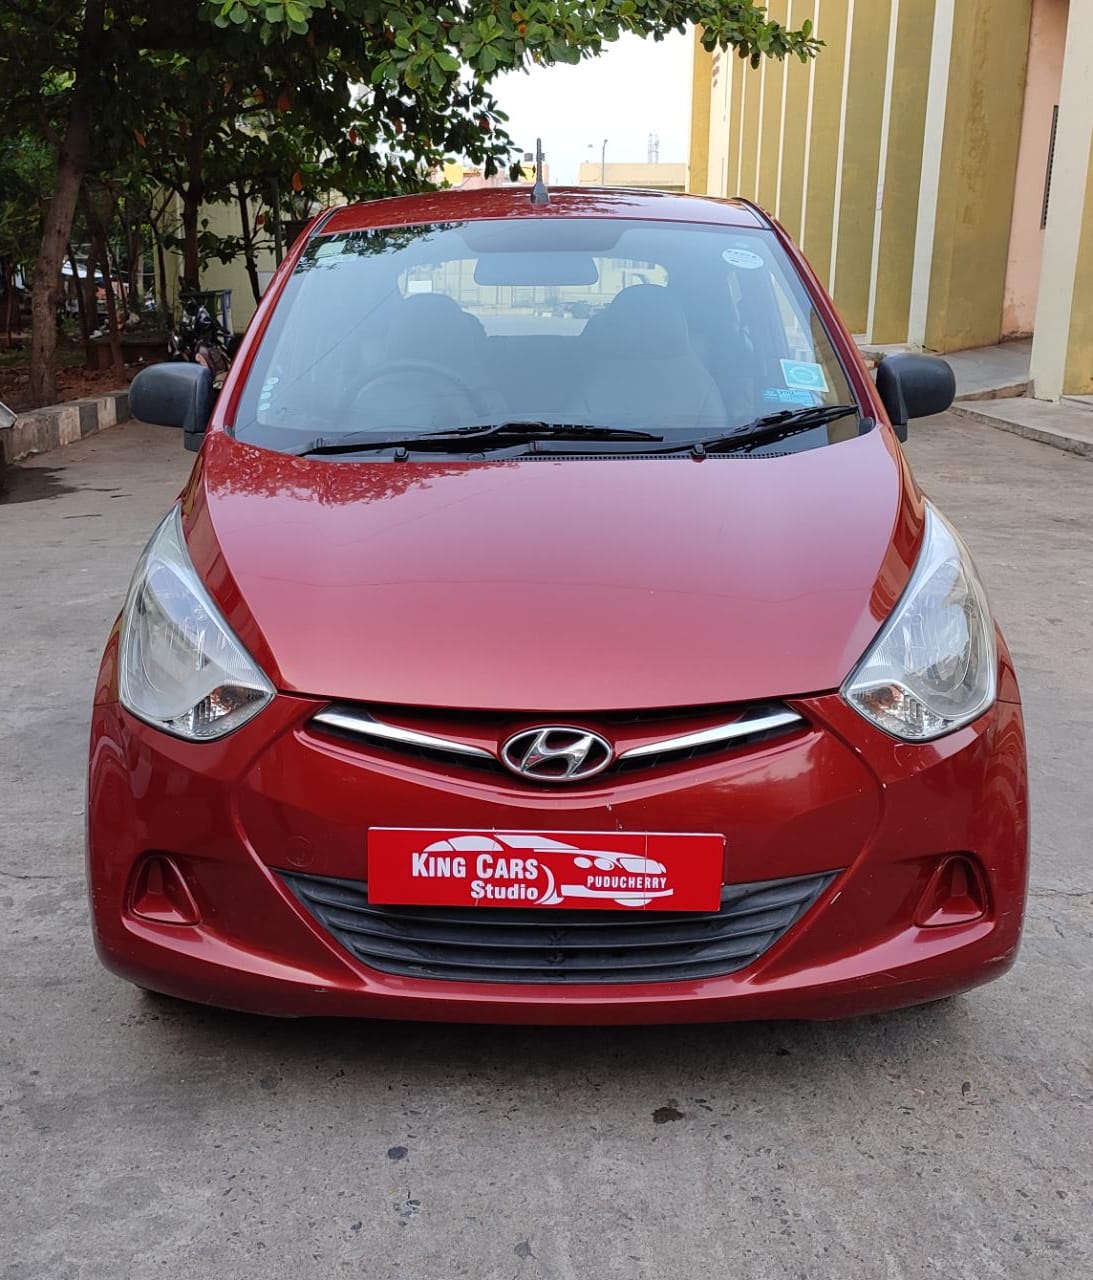 4743-for-sale-Hyundai-Eon-Petrol-First-Owner-2013-TN-registered-rs-259999